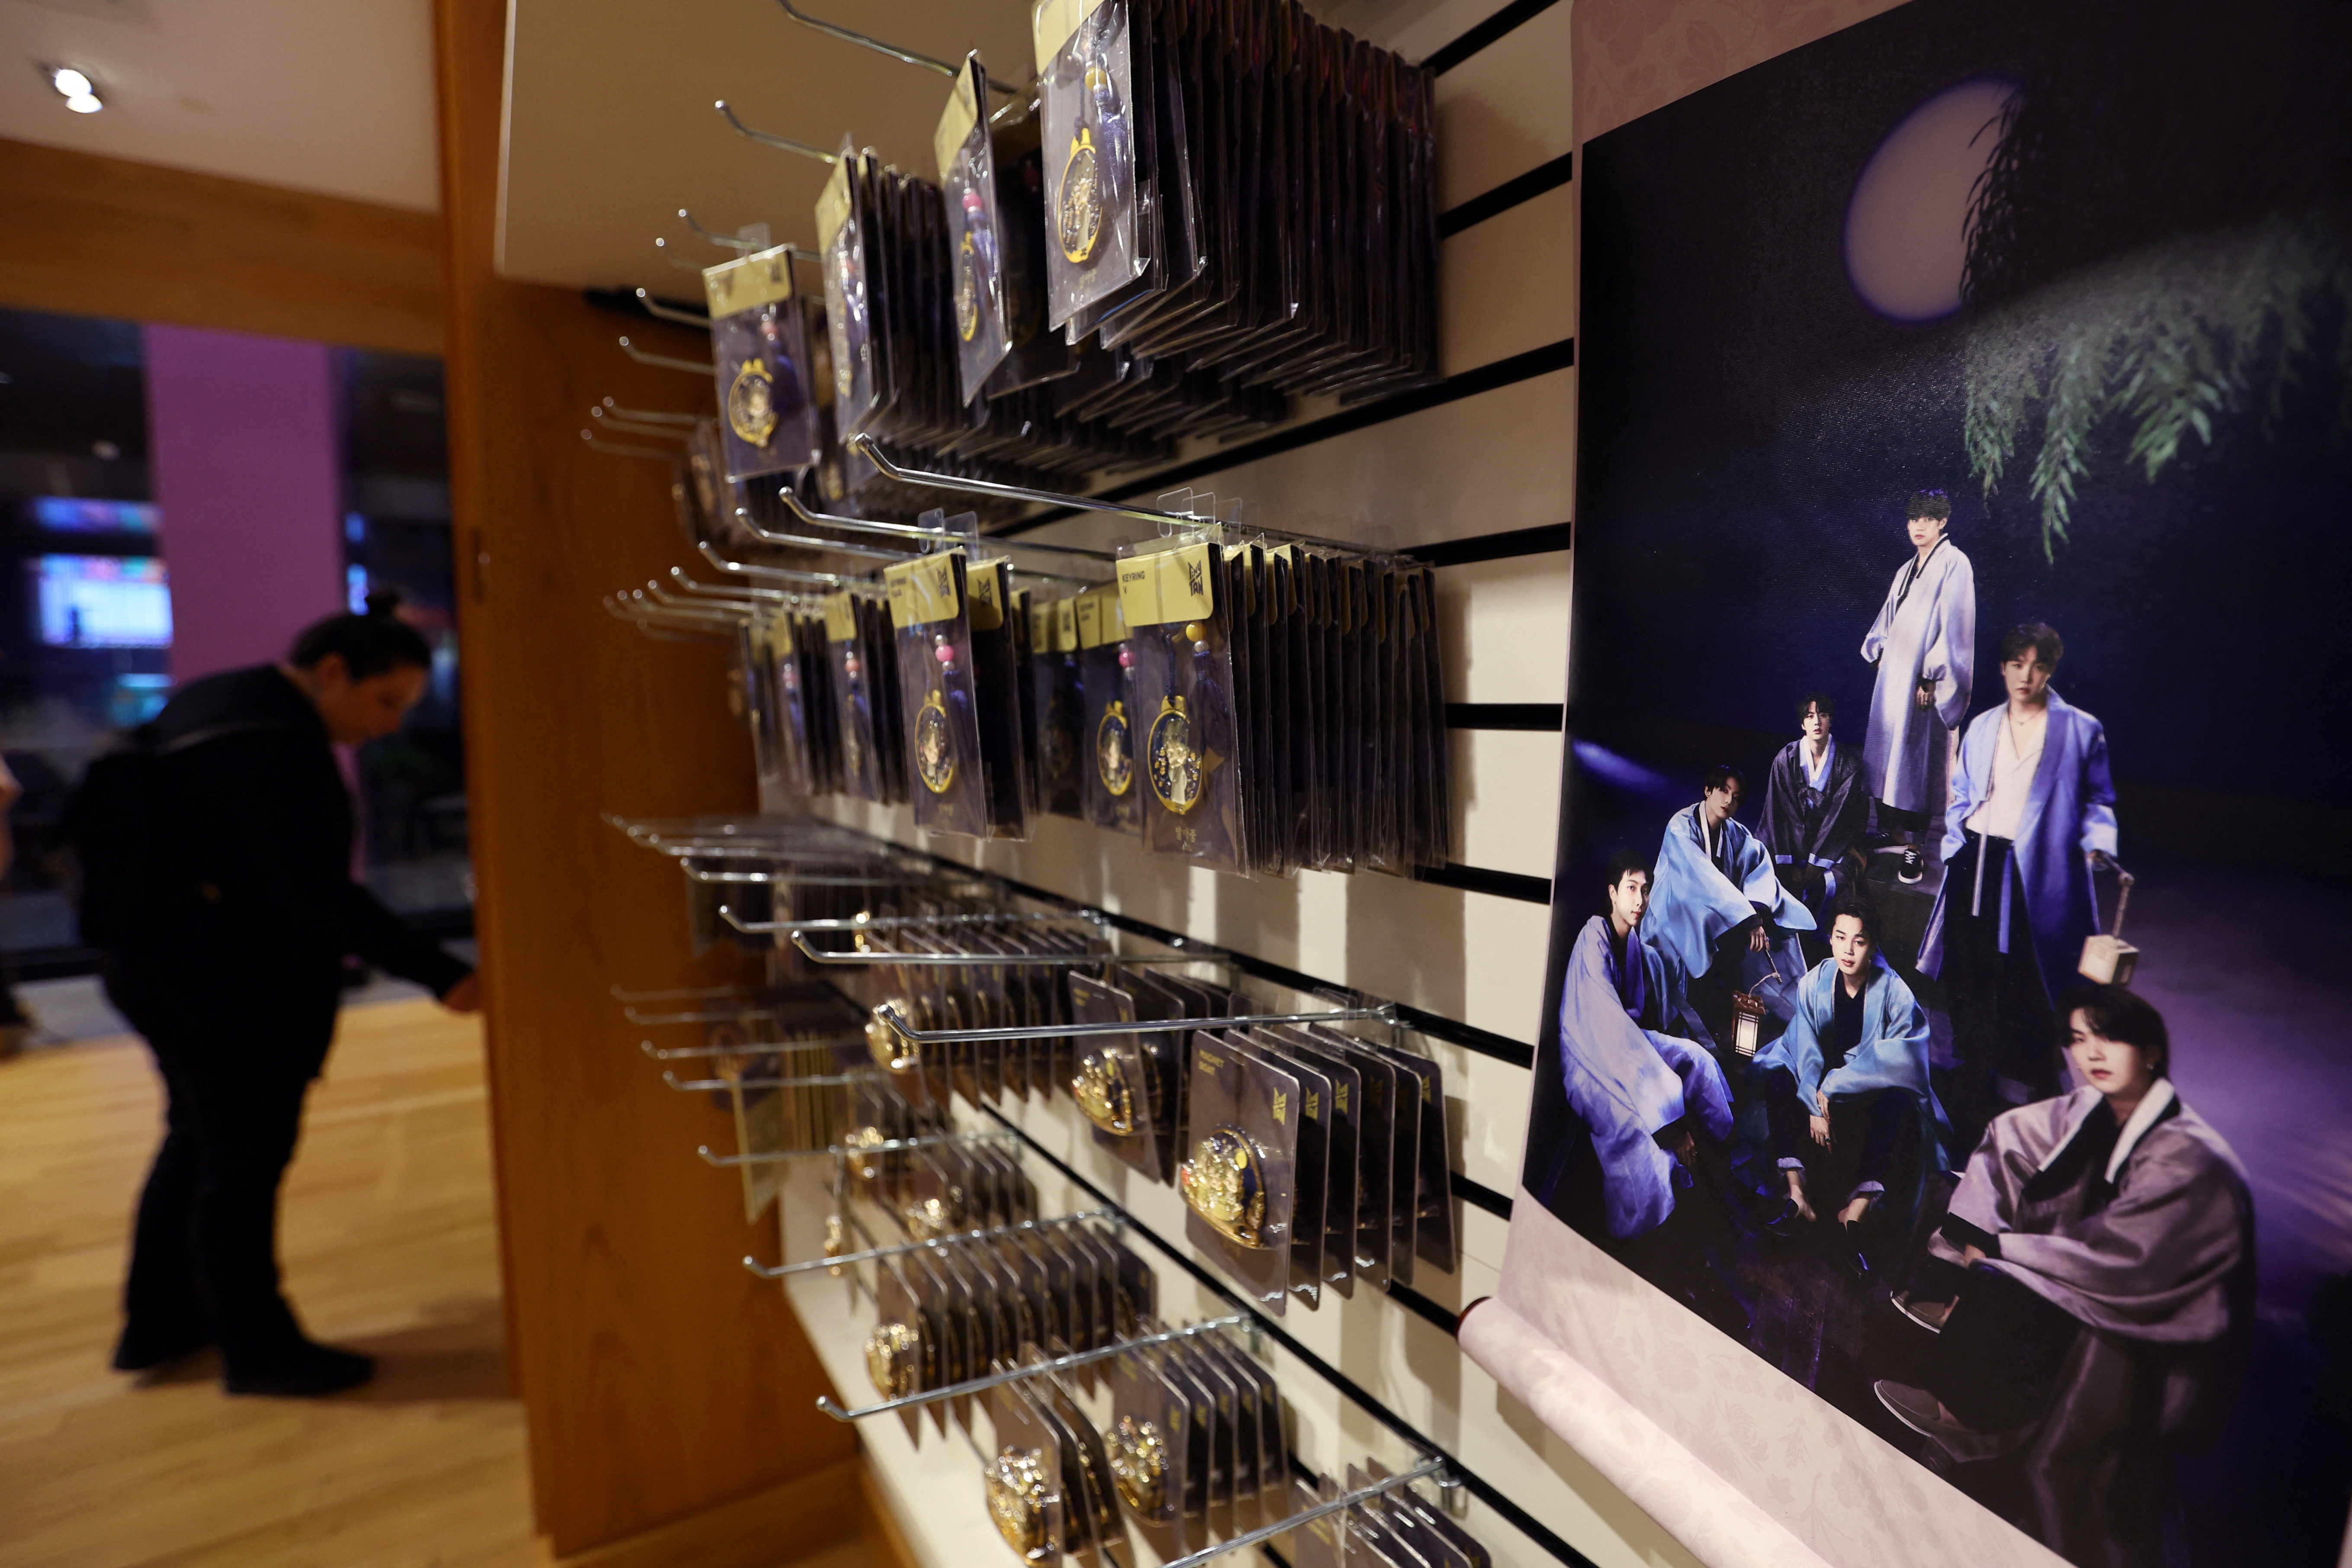 BTS Pop-Up store featuring items of International K-Pop sensation BTS for sale, opens in New York